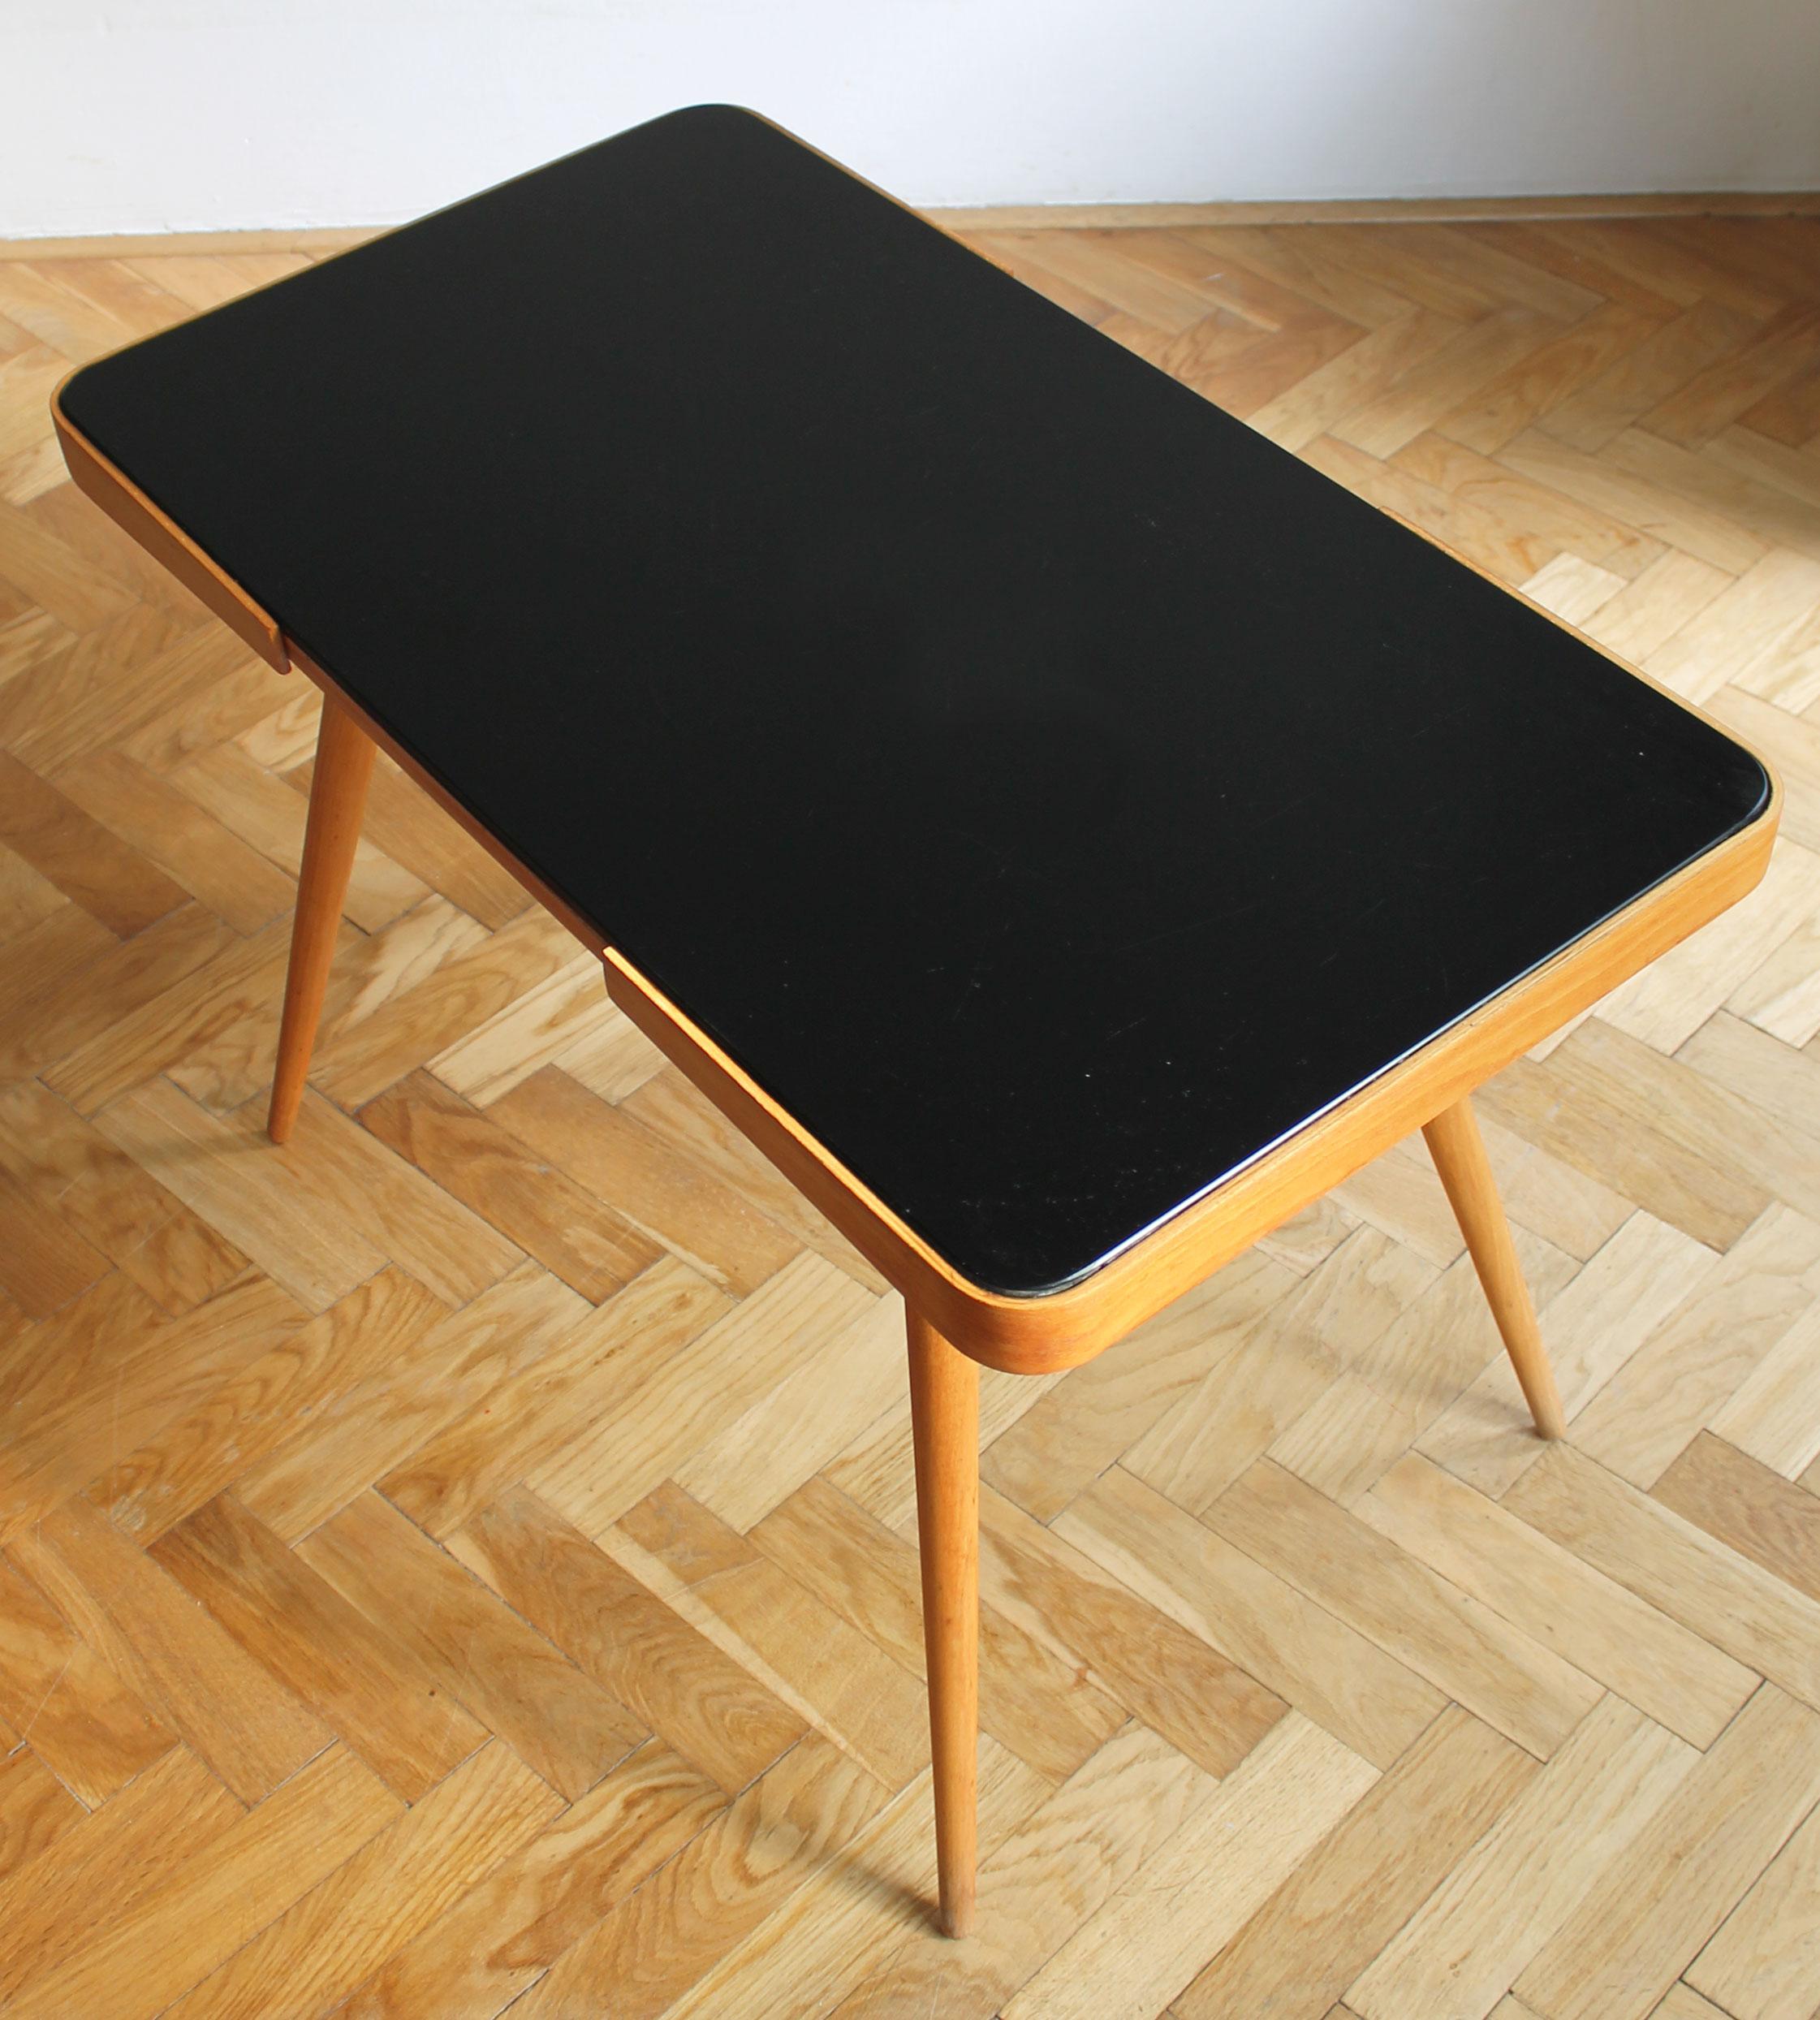 Lacquered 1960's Mid Century Coffee Table With a Black Opaxite Glass - Smaller version For Sale